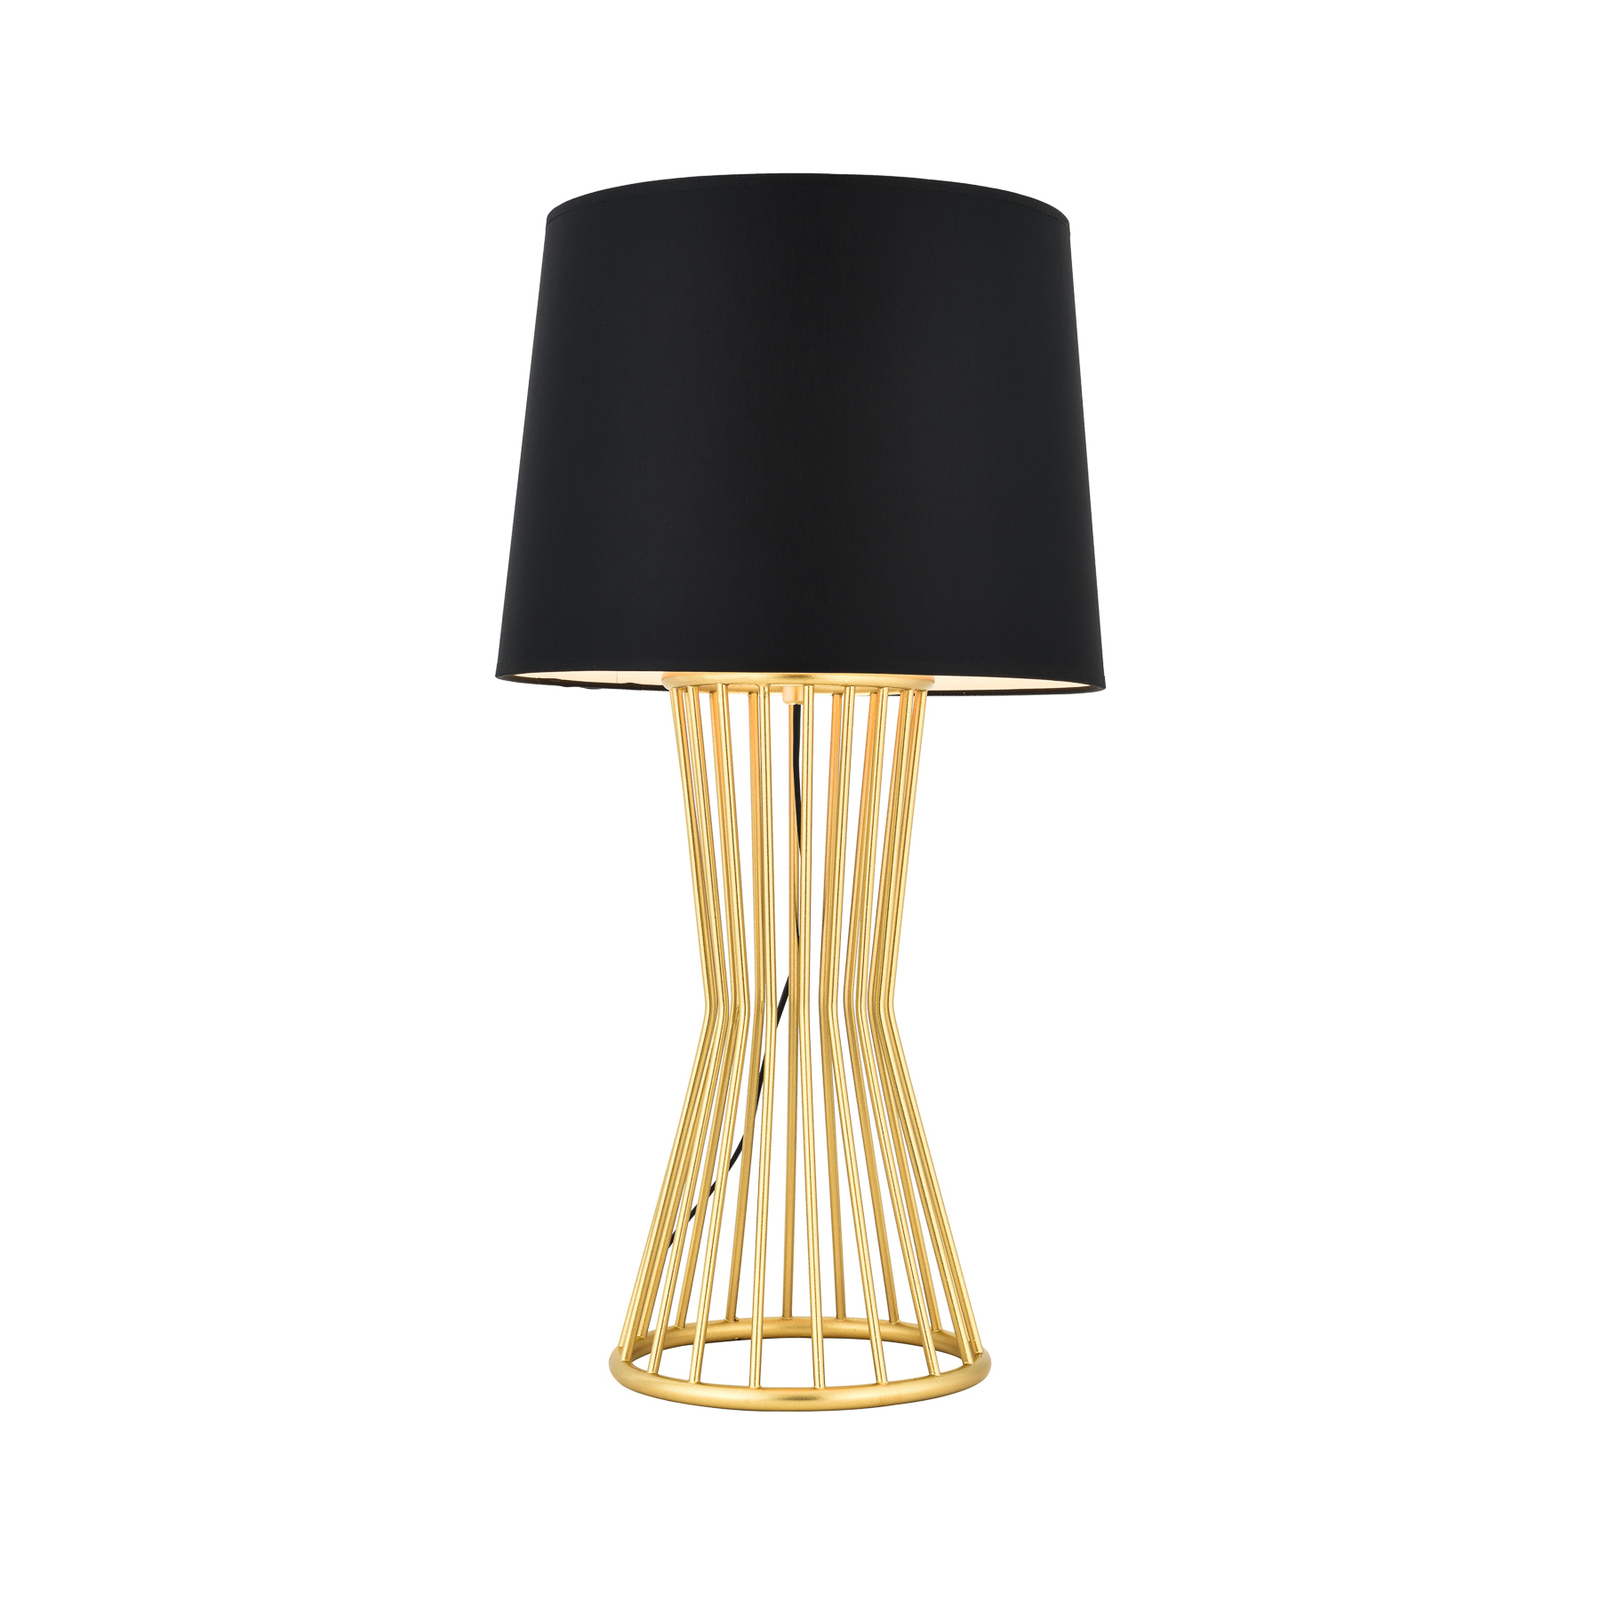 HML-9073-1BSA table lamp in gold and black